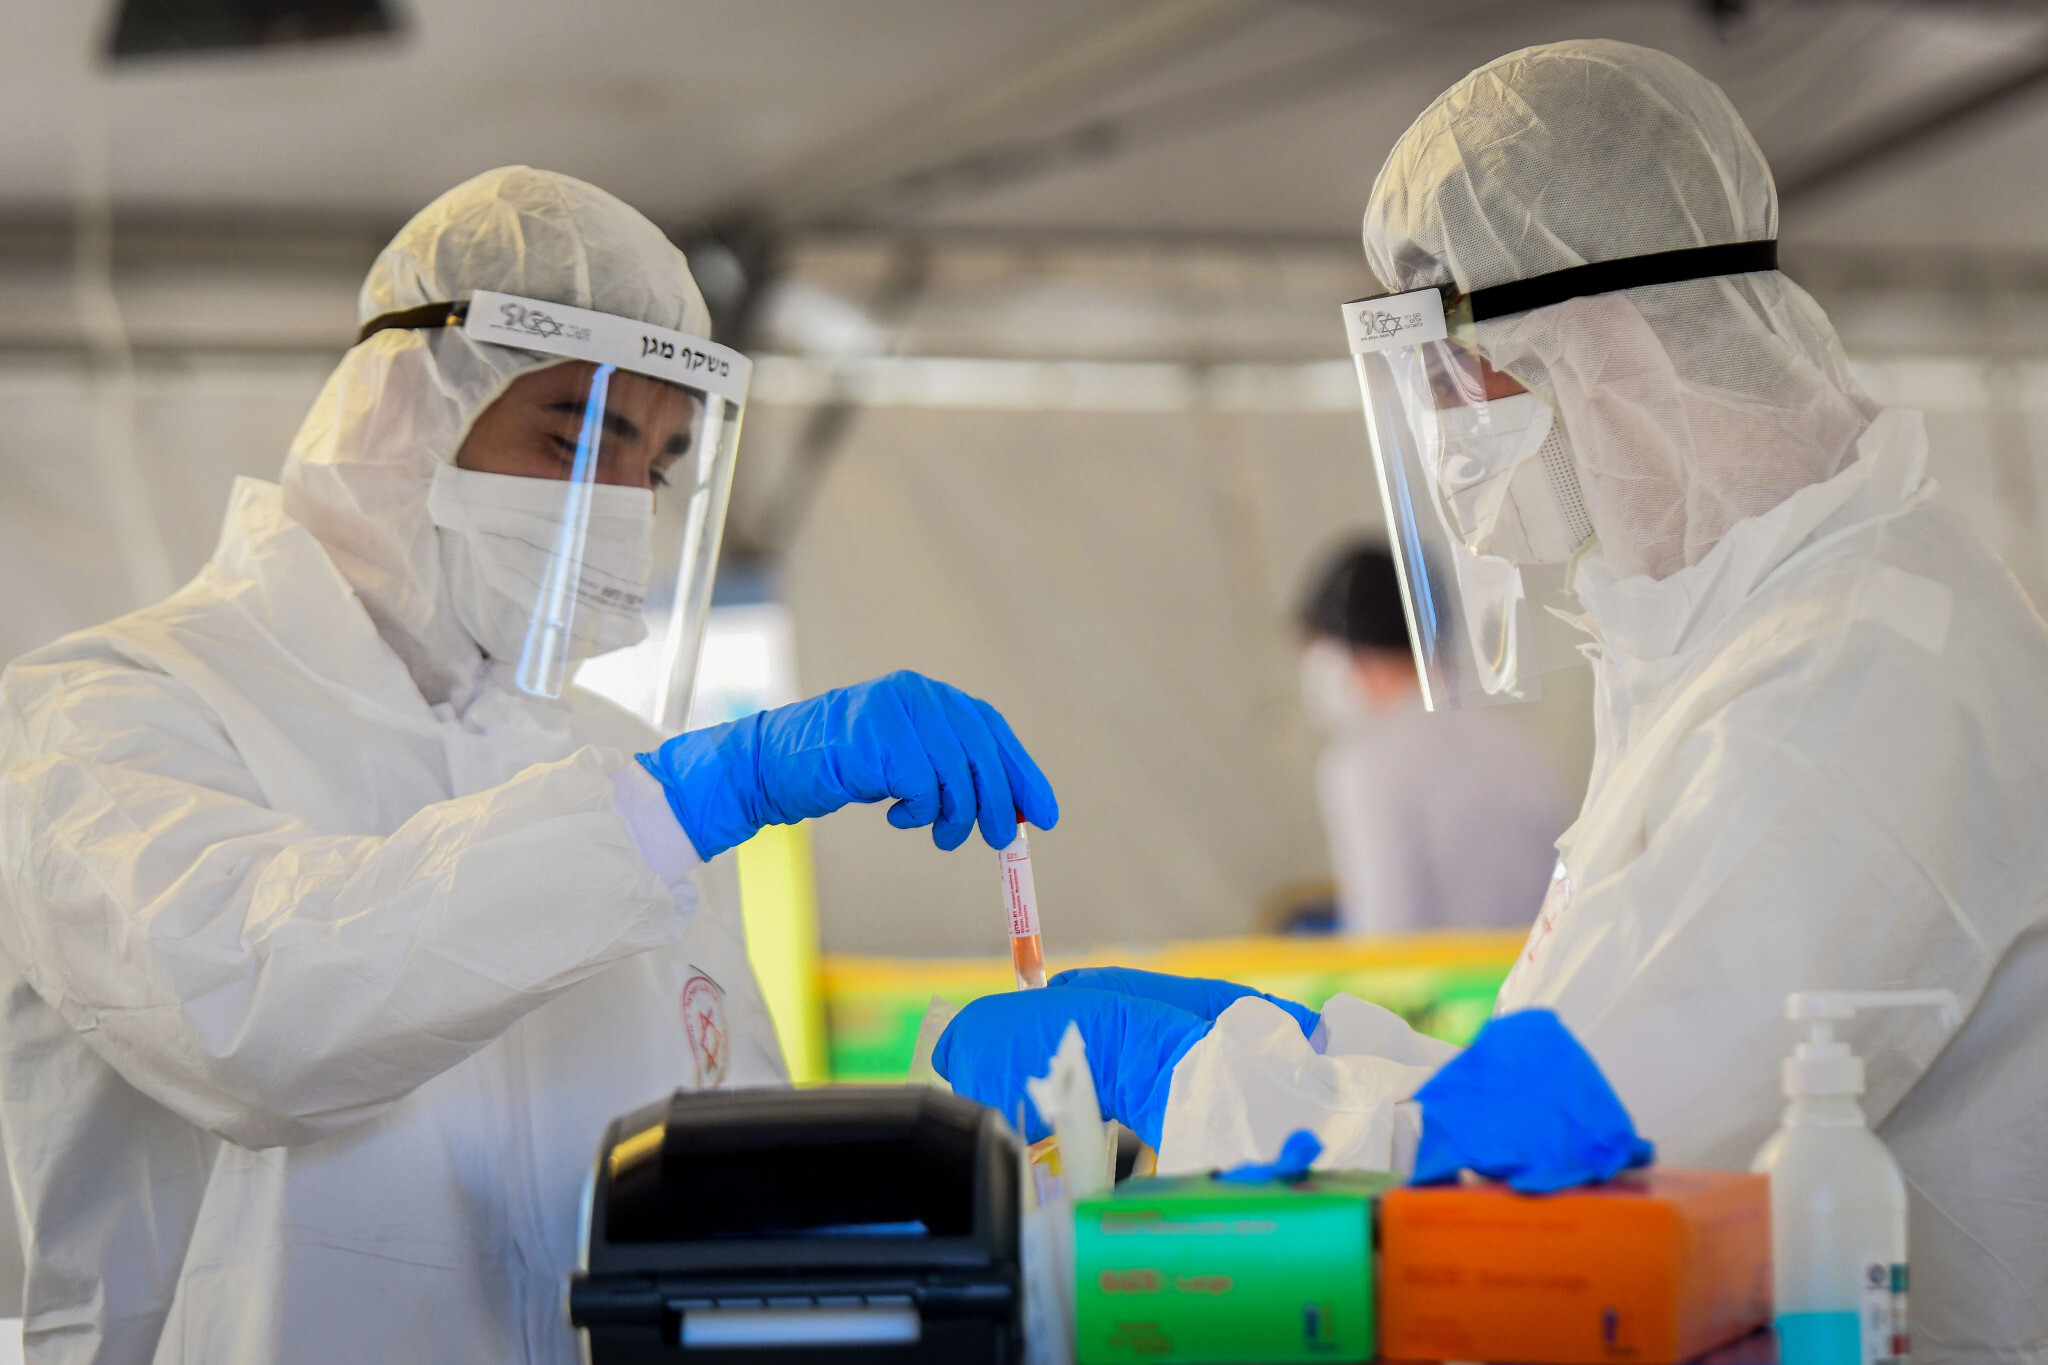 Magen David Adom medical team members, wearing protective gear, handle a coronavirus test sample at a drive-through site in Tel Aviv, March 22, 2020. (Flash90)